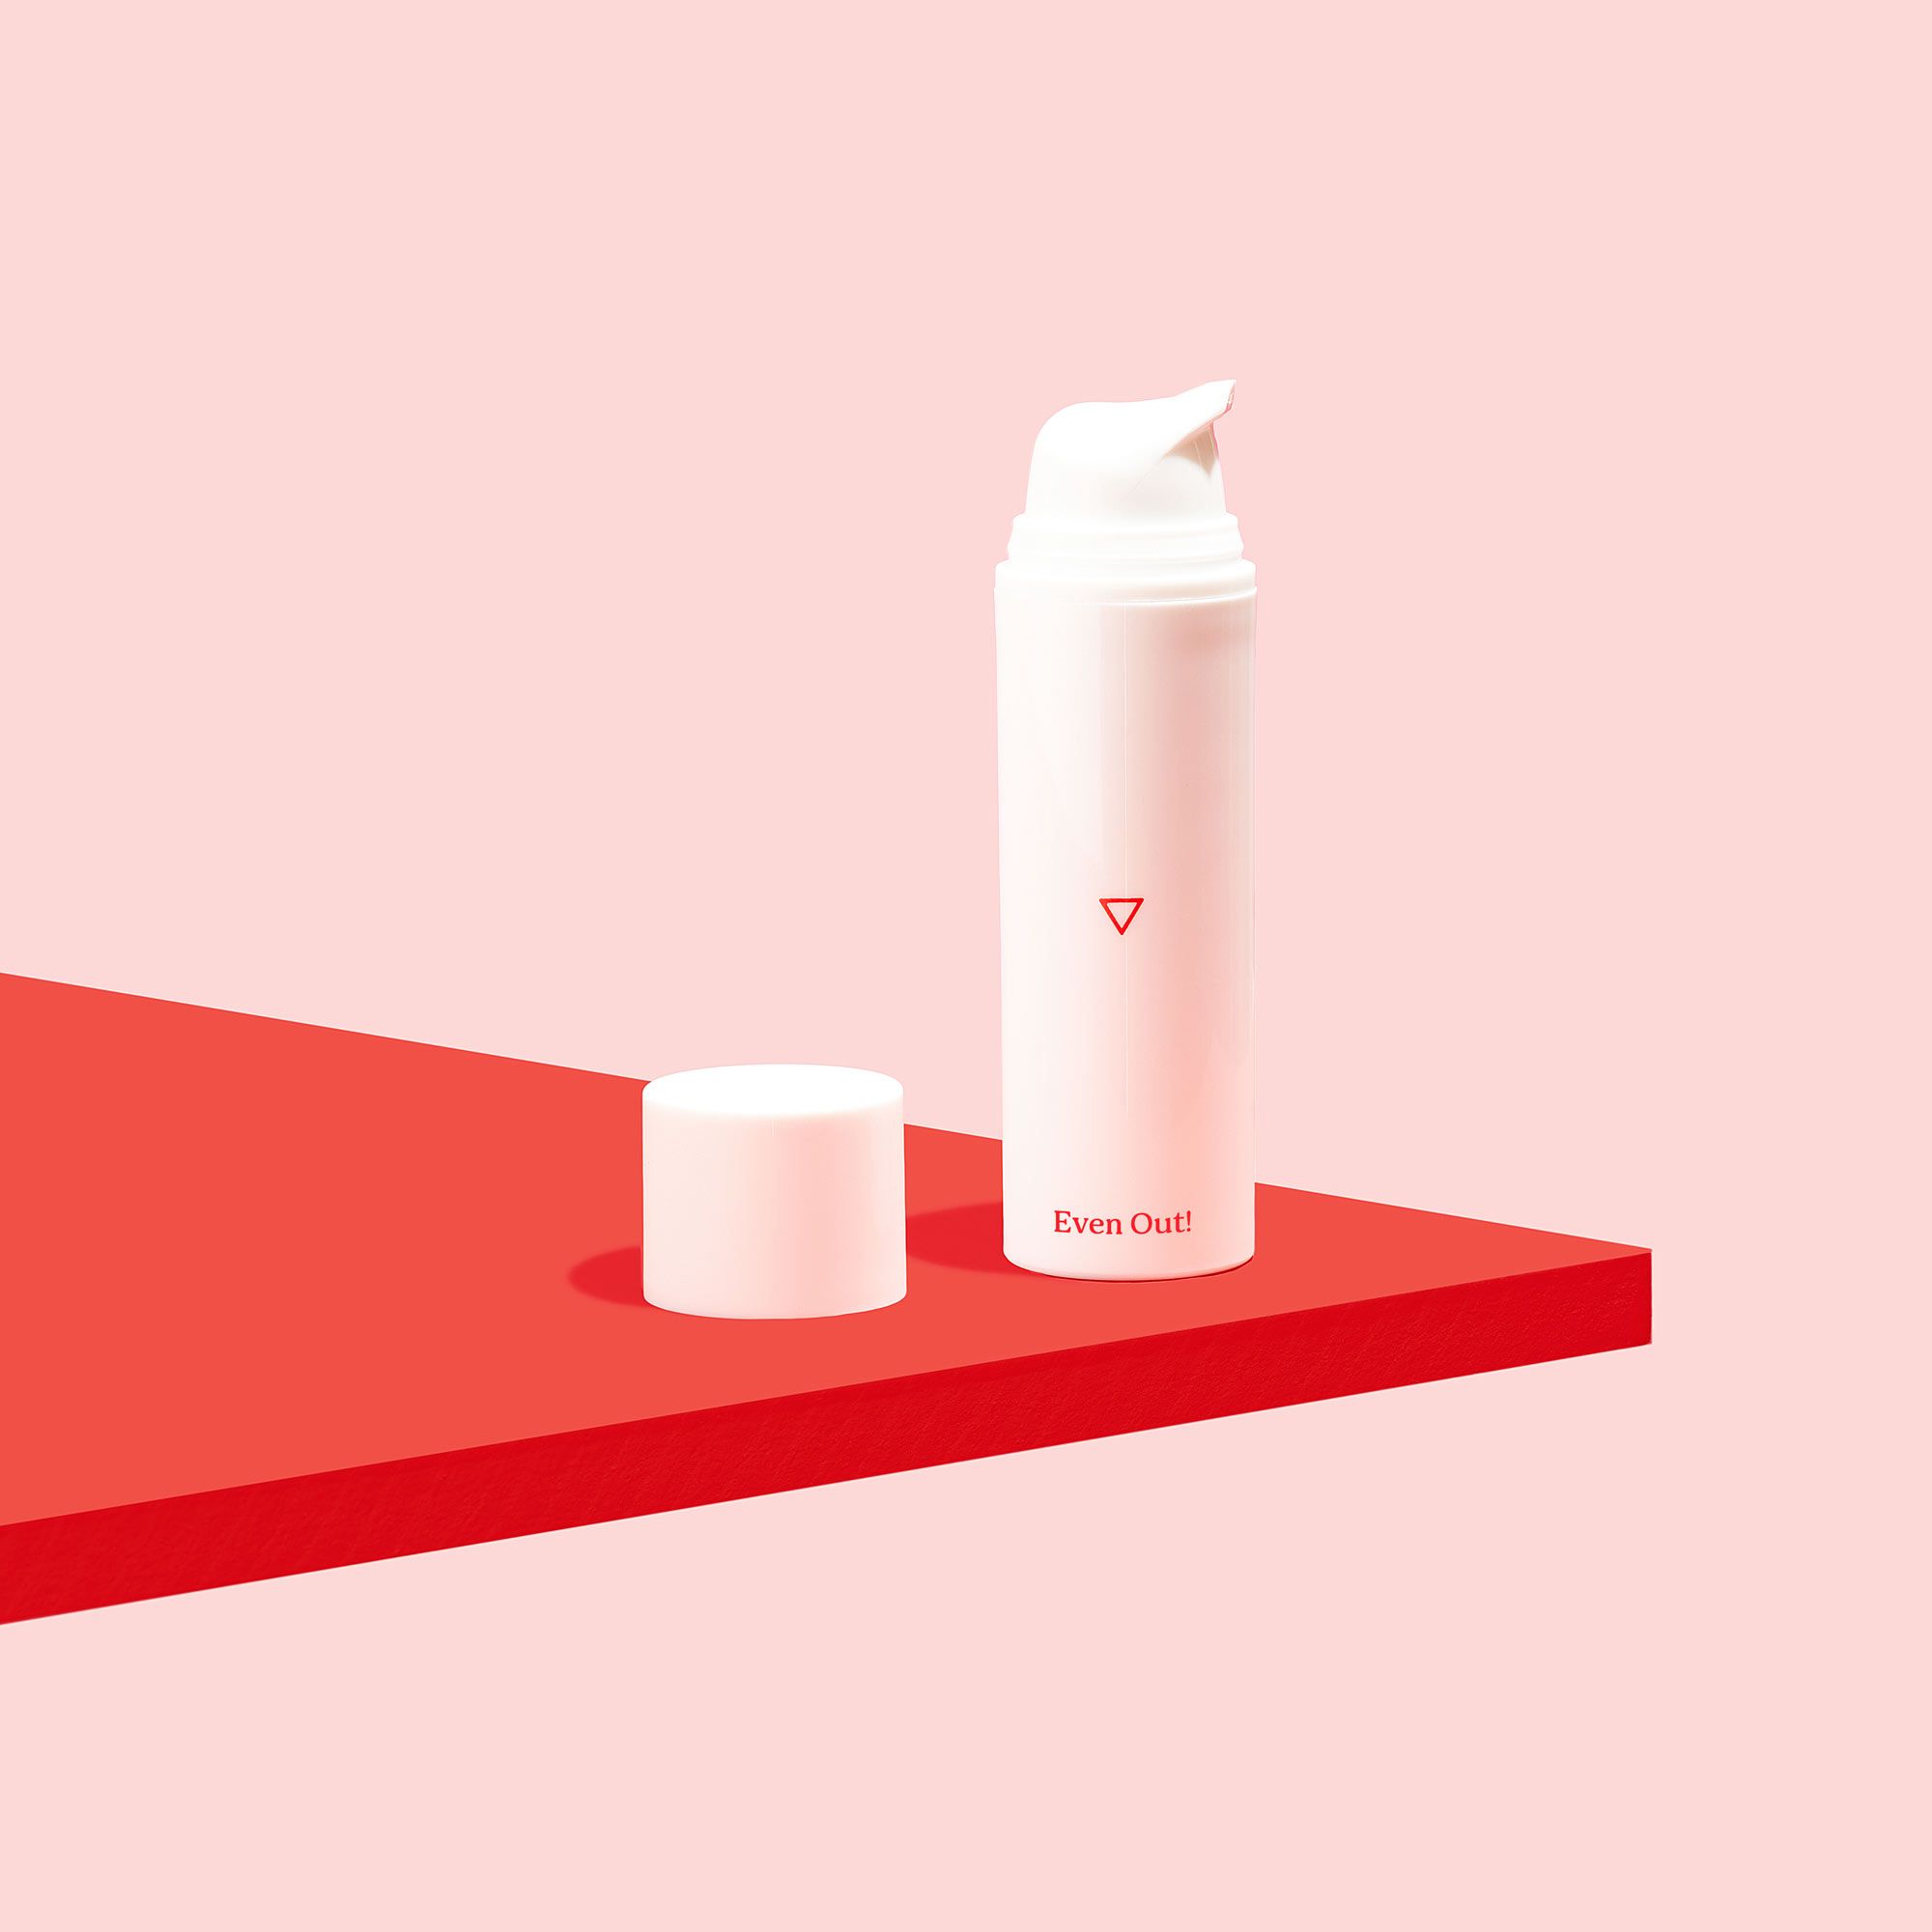 Bottle of Hydroquinone cream on red surface with pink background